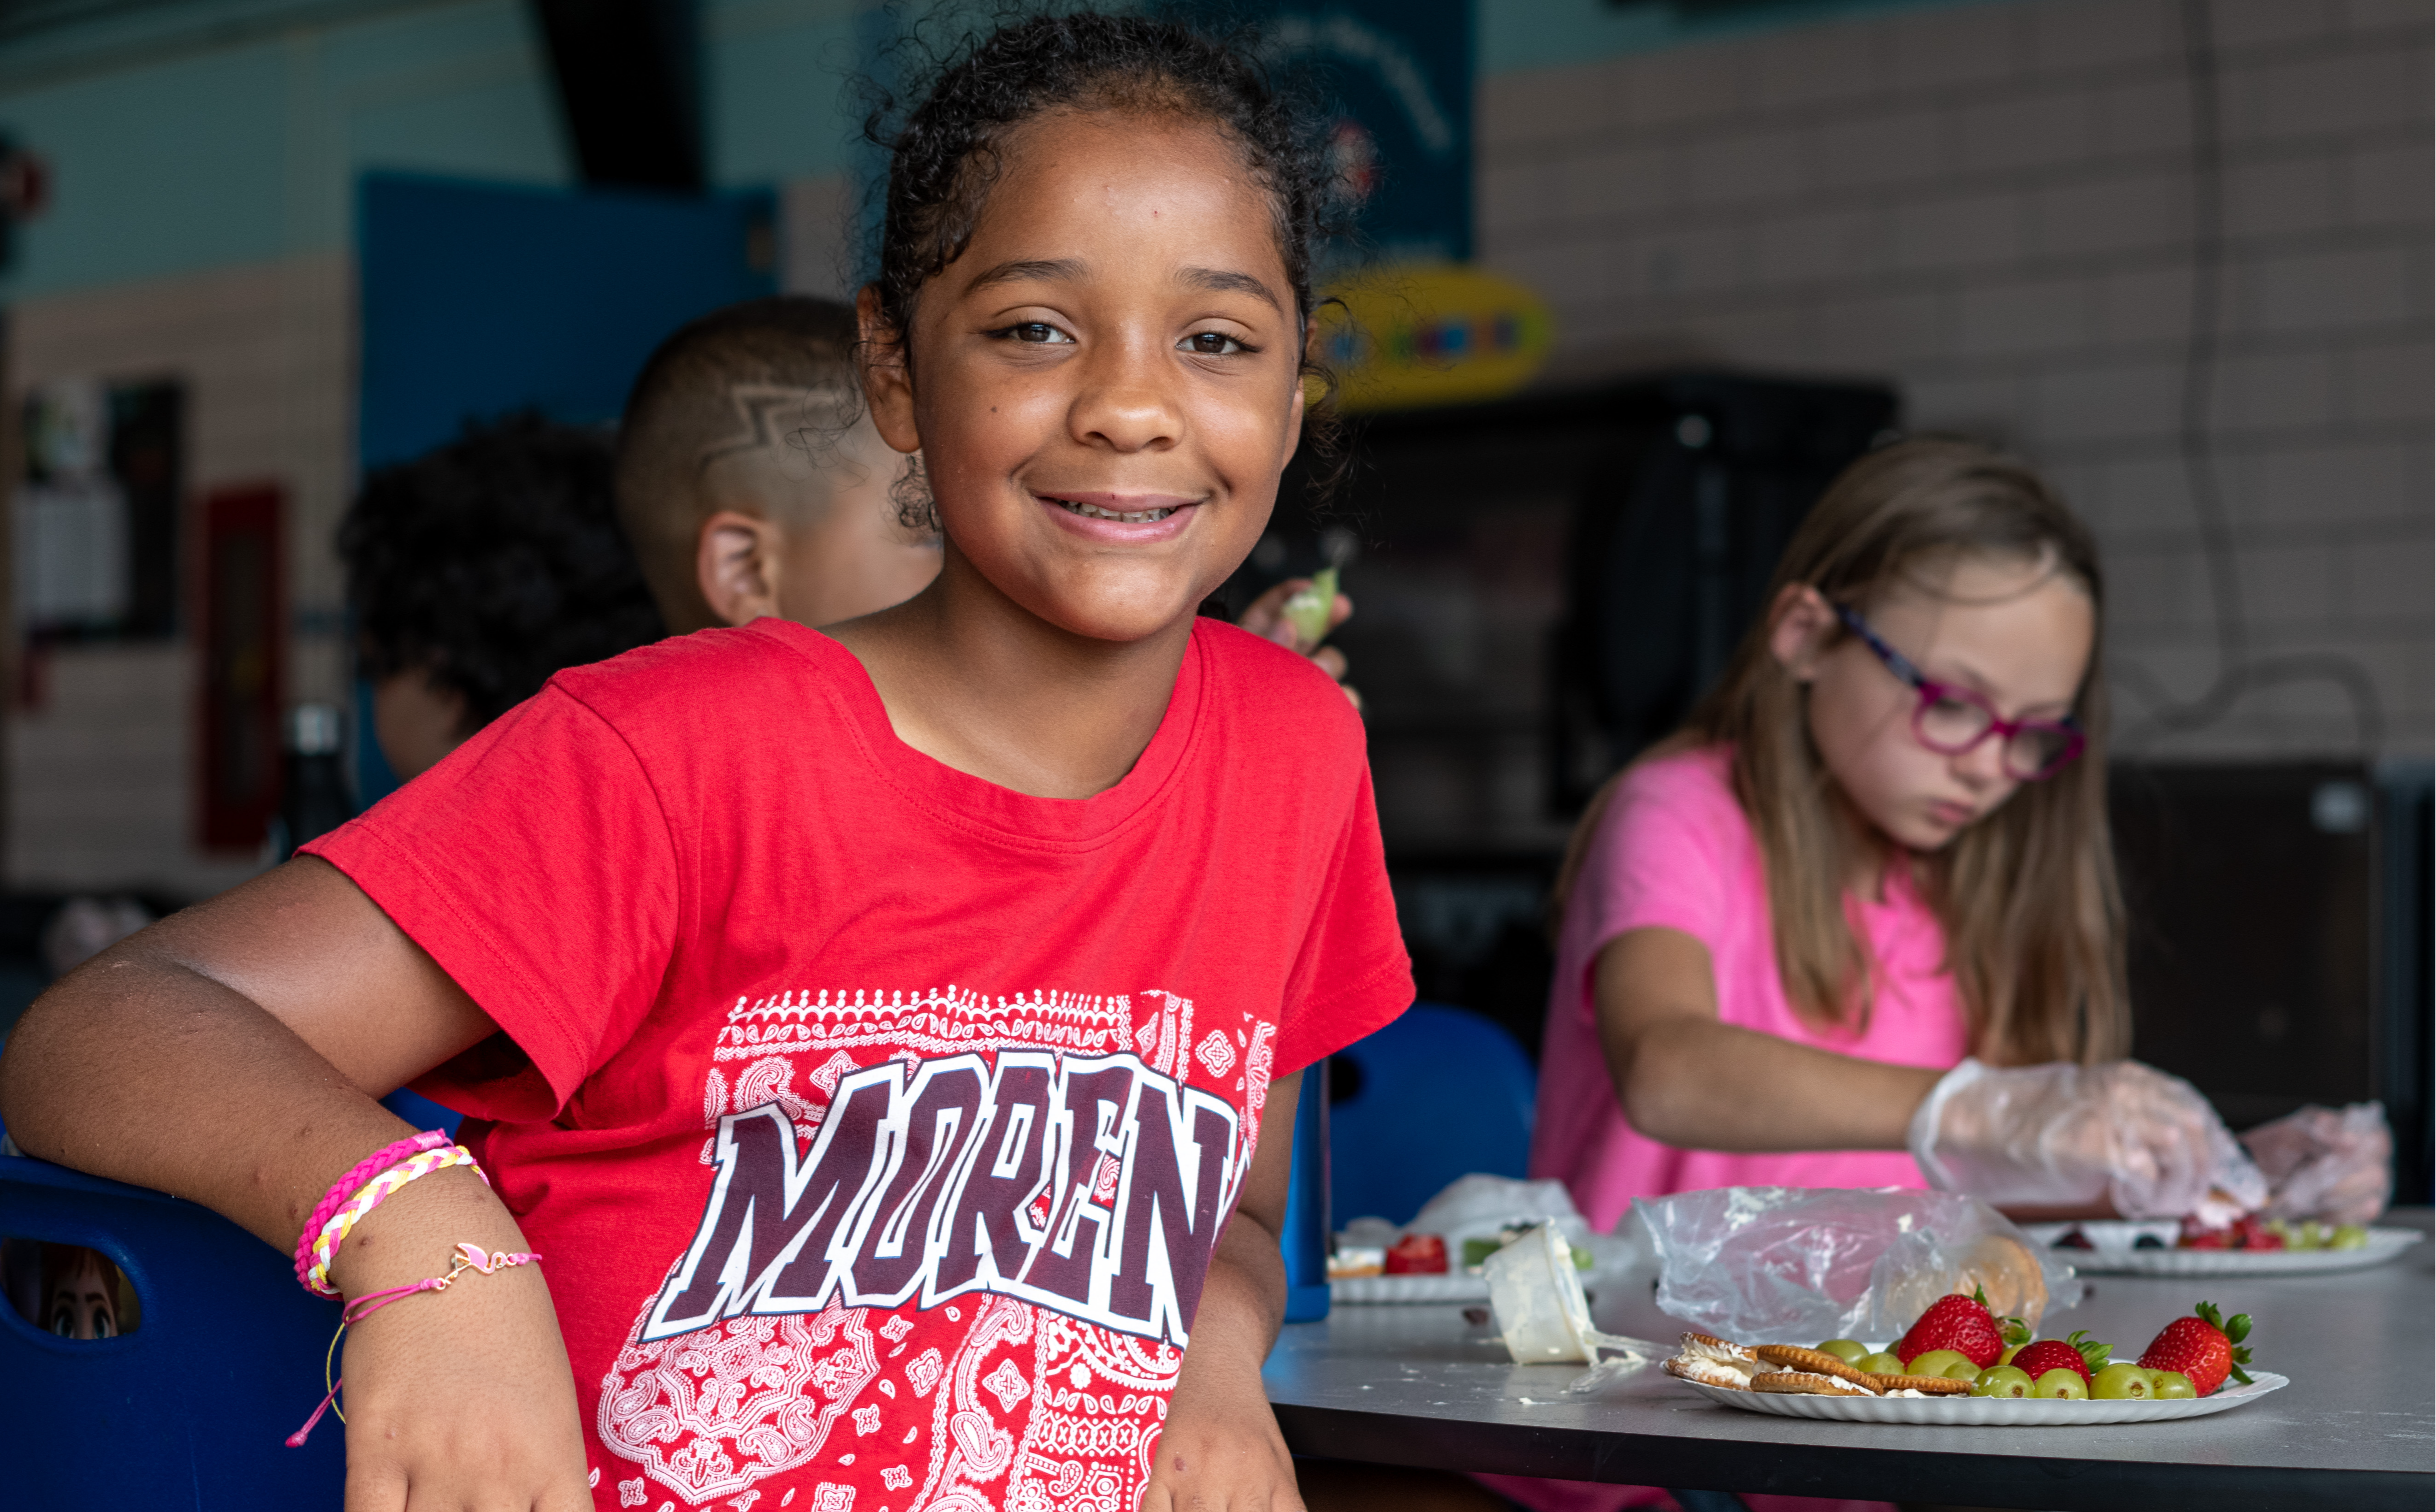 A smiling student next to a plate of fruit looking straight at the camera as other students behind them work on their own  plates.